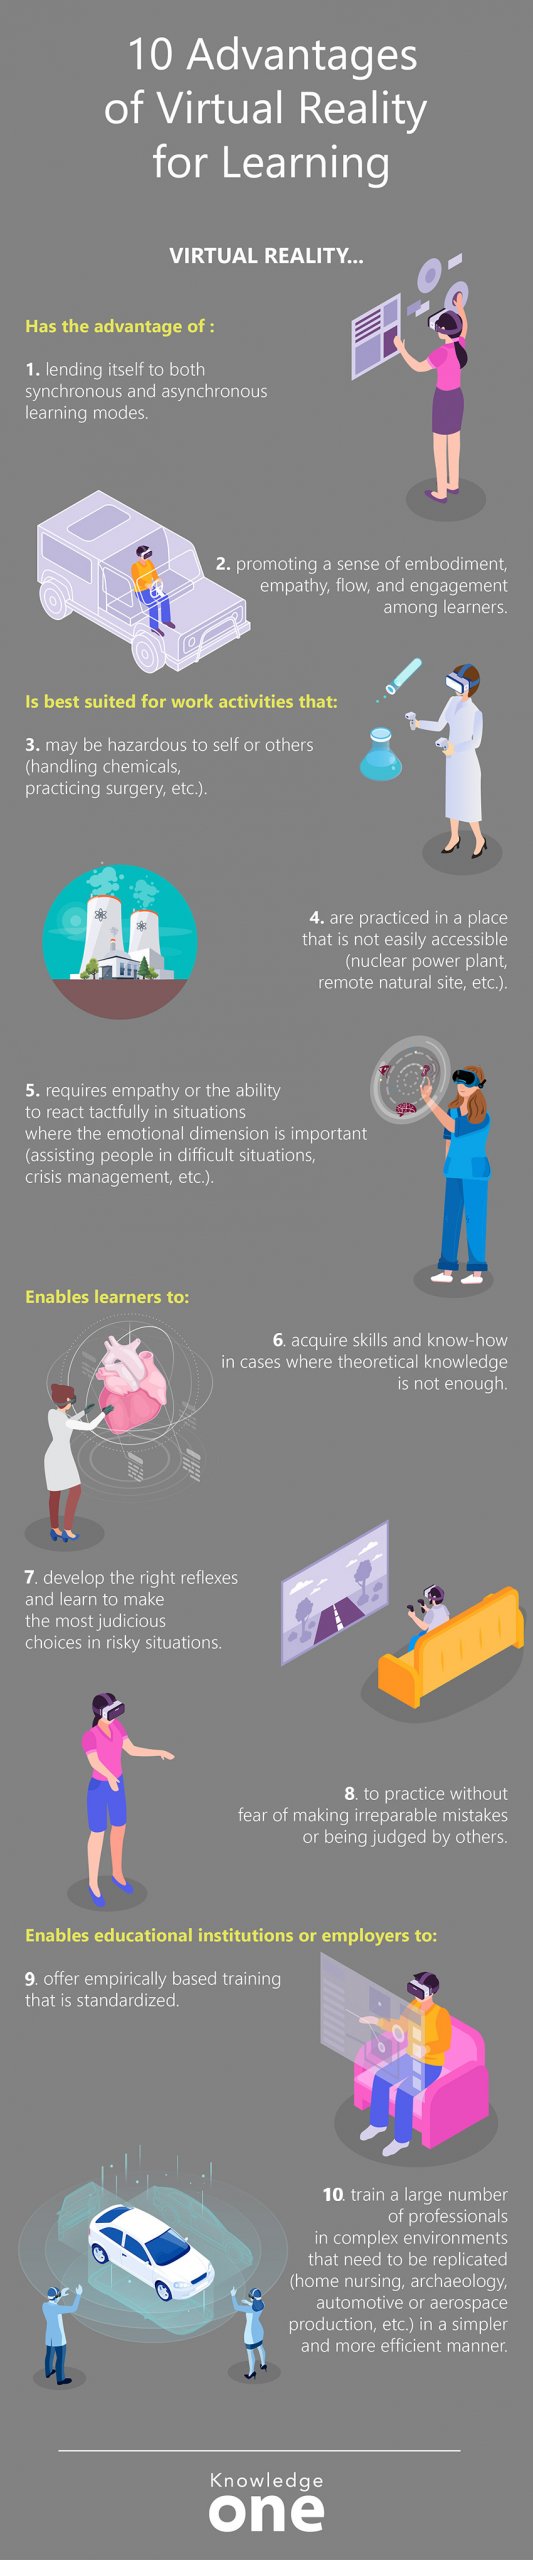 Infographic about the advantages of VR for learning